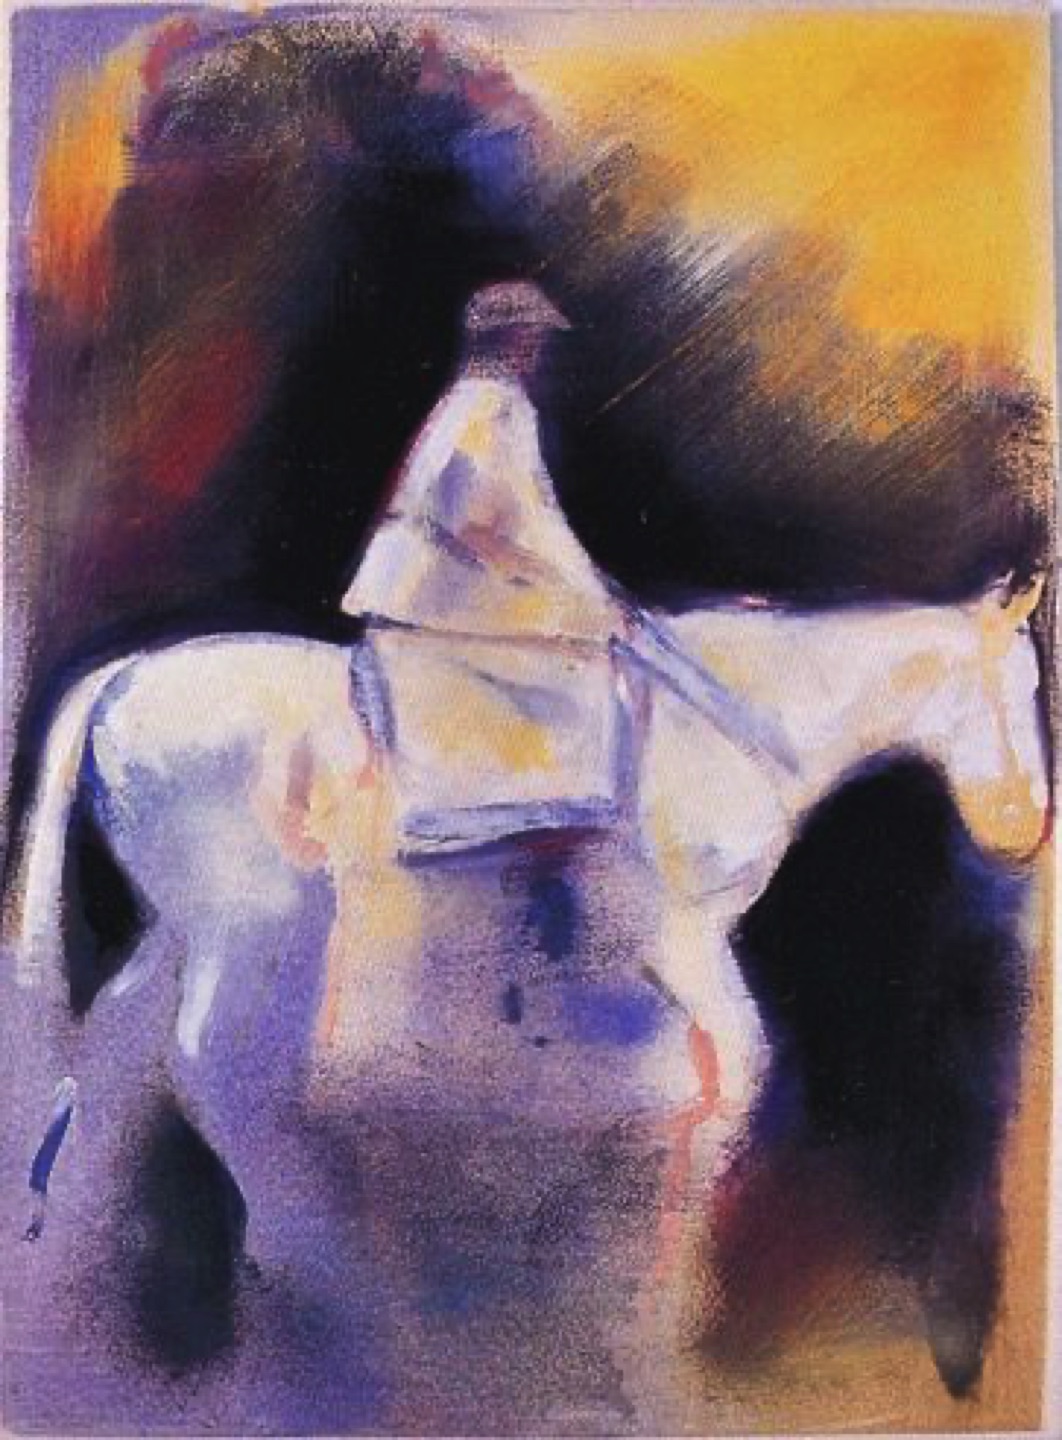 Gregg Chadwick's Pale Rider in Horse by Lorraine Harrison
The Ivy Press, London and Watson Guptill, New York 2000